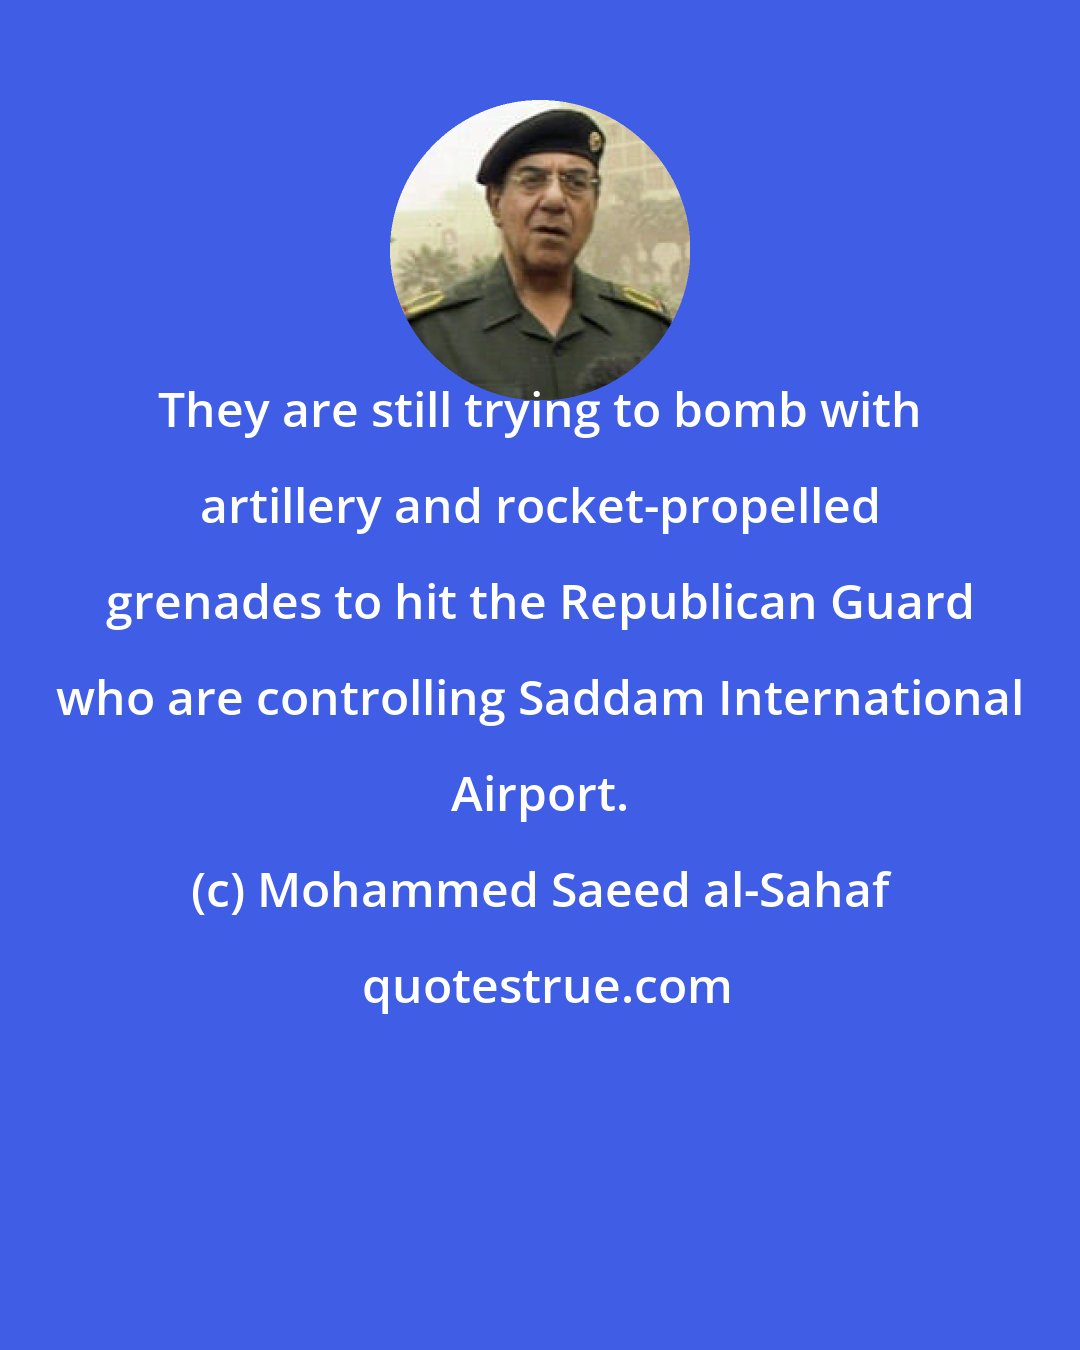 Mohammed Saeed al-Sahaf: They are still trying to bomb with artillery and rocket-propelled grenades to hit the Republican Guard who are controlling Saddam International Airport.